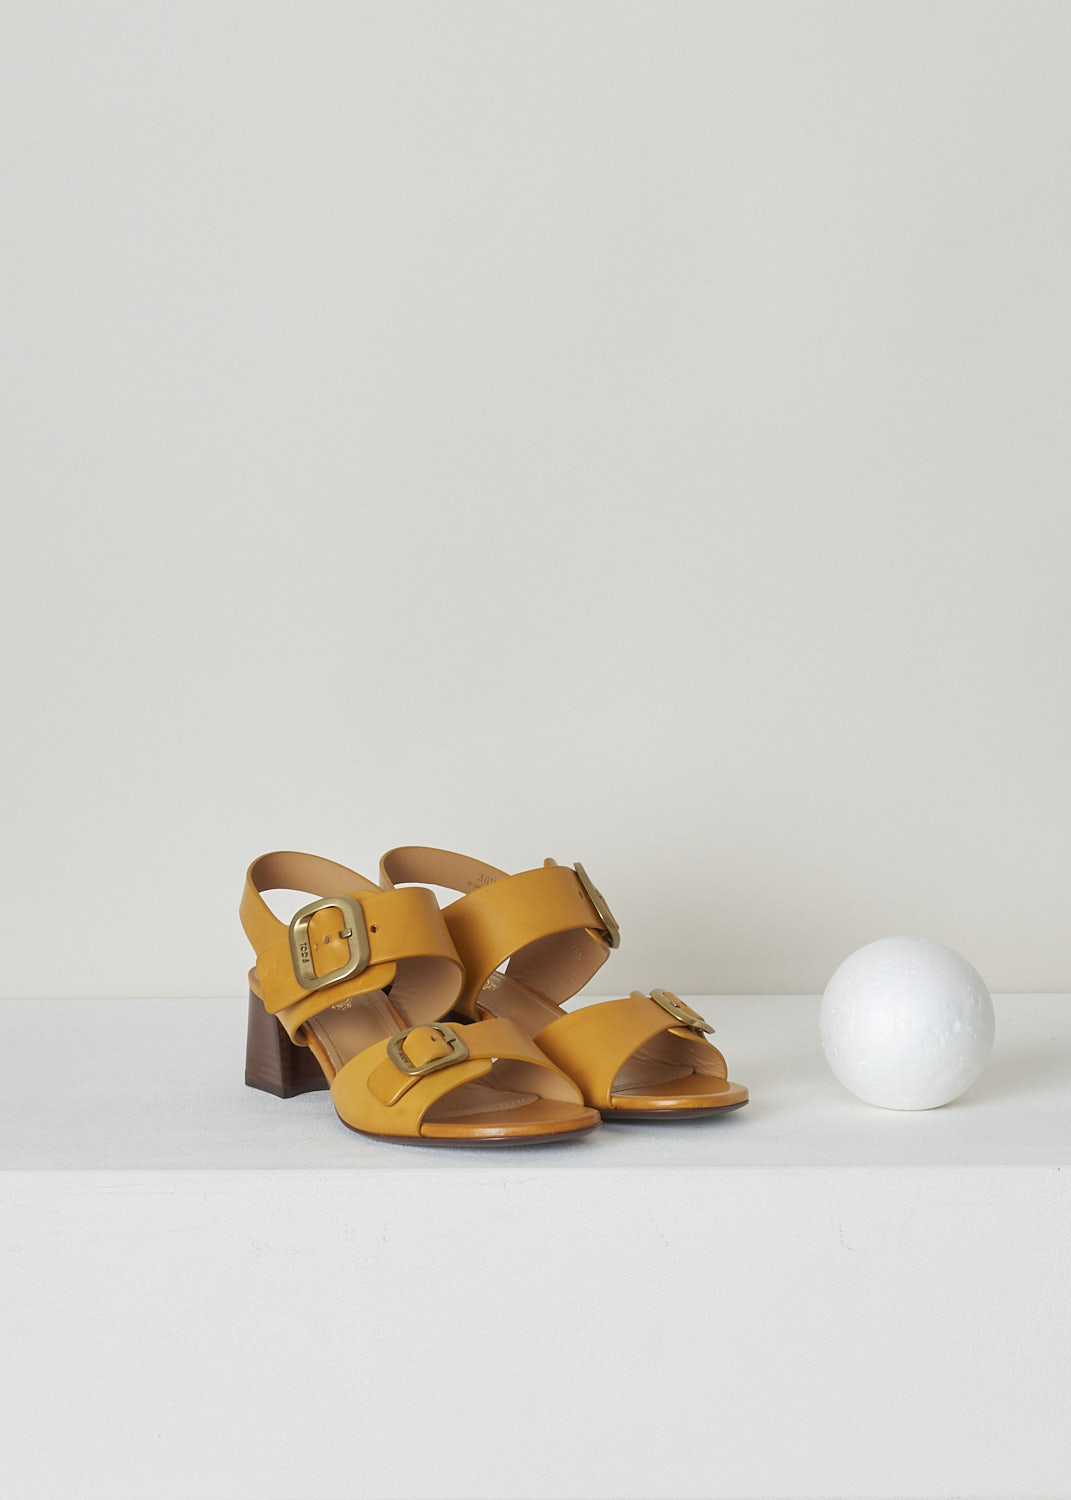 TODS, ORANGE BUCKLE SANDALS WITH HEEL, XXW04J0FH60NHVG816_SAND_CUOIO_MANDARINO, Orange, Yellow, Front, These orange heeled sandals have a double buckle-strap fastening with gold-toned buckles, a slingback strap and a squared open toe. 
